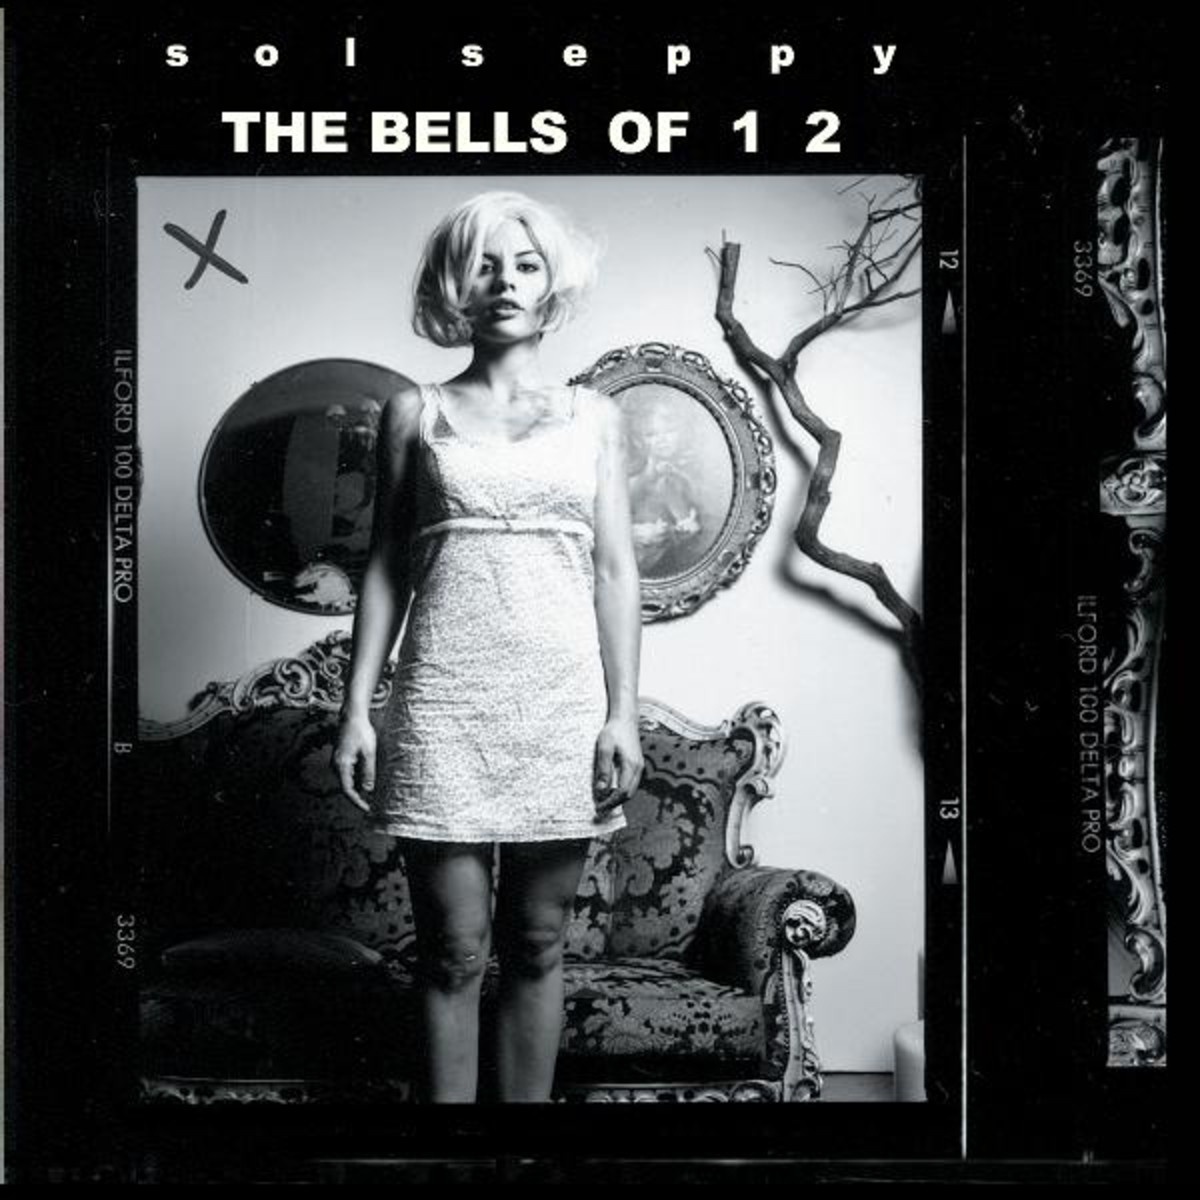 The Bells of 1 2